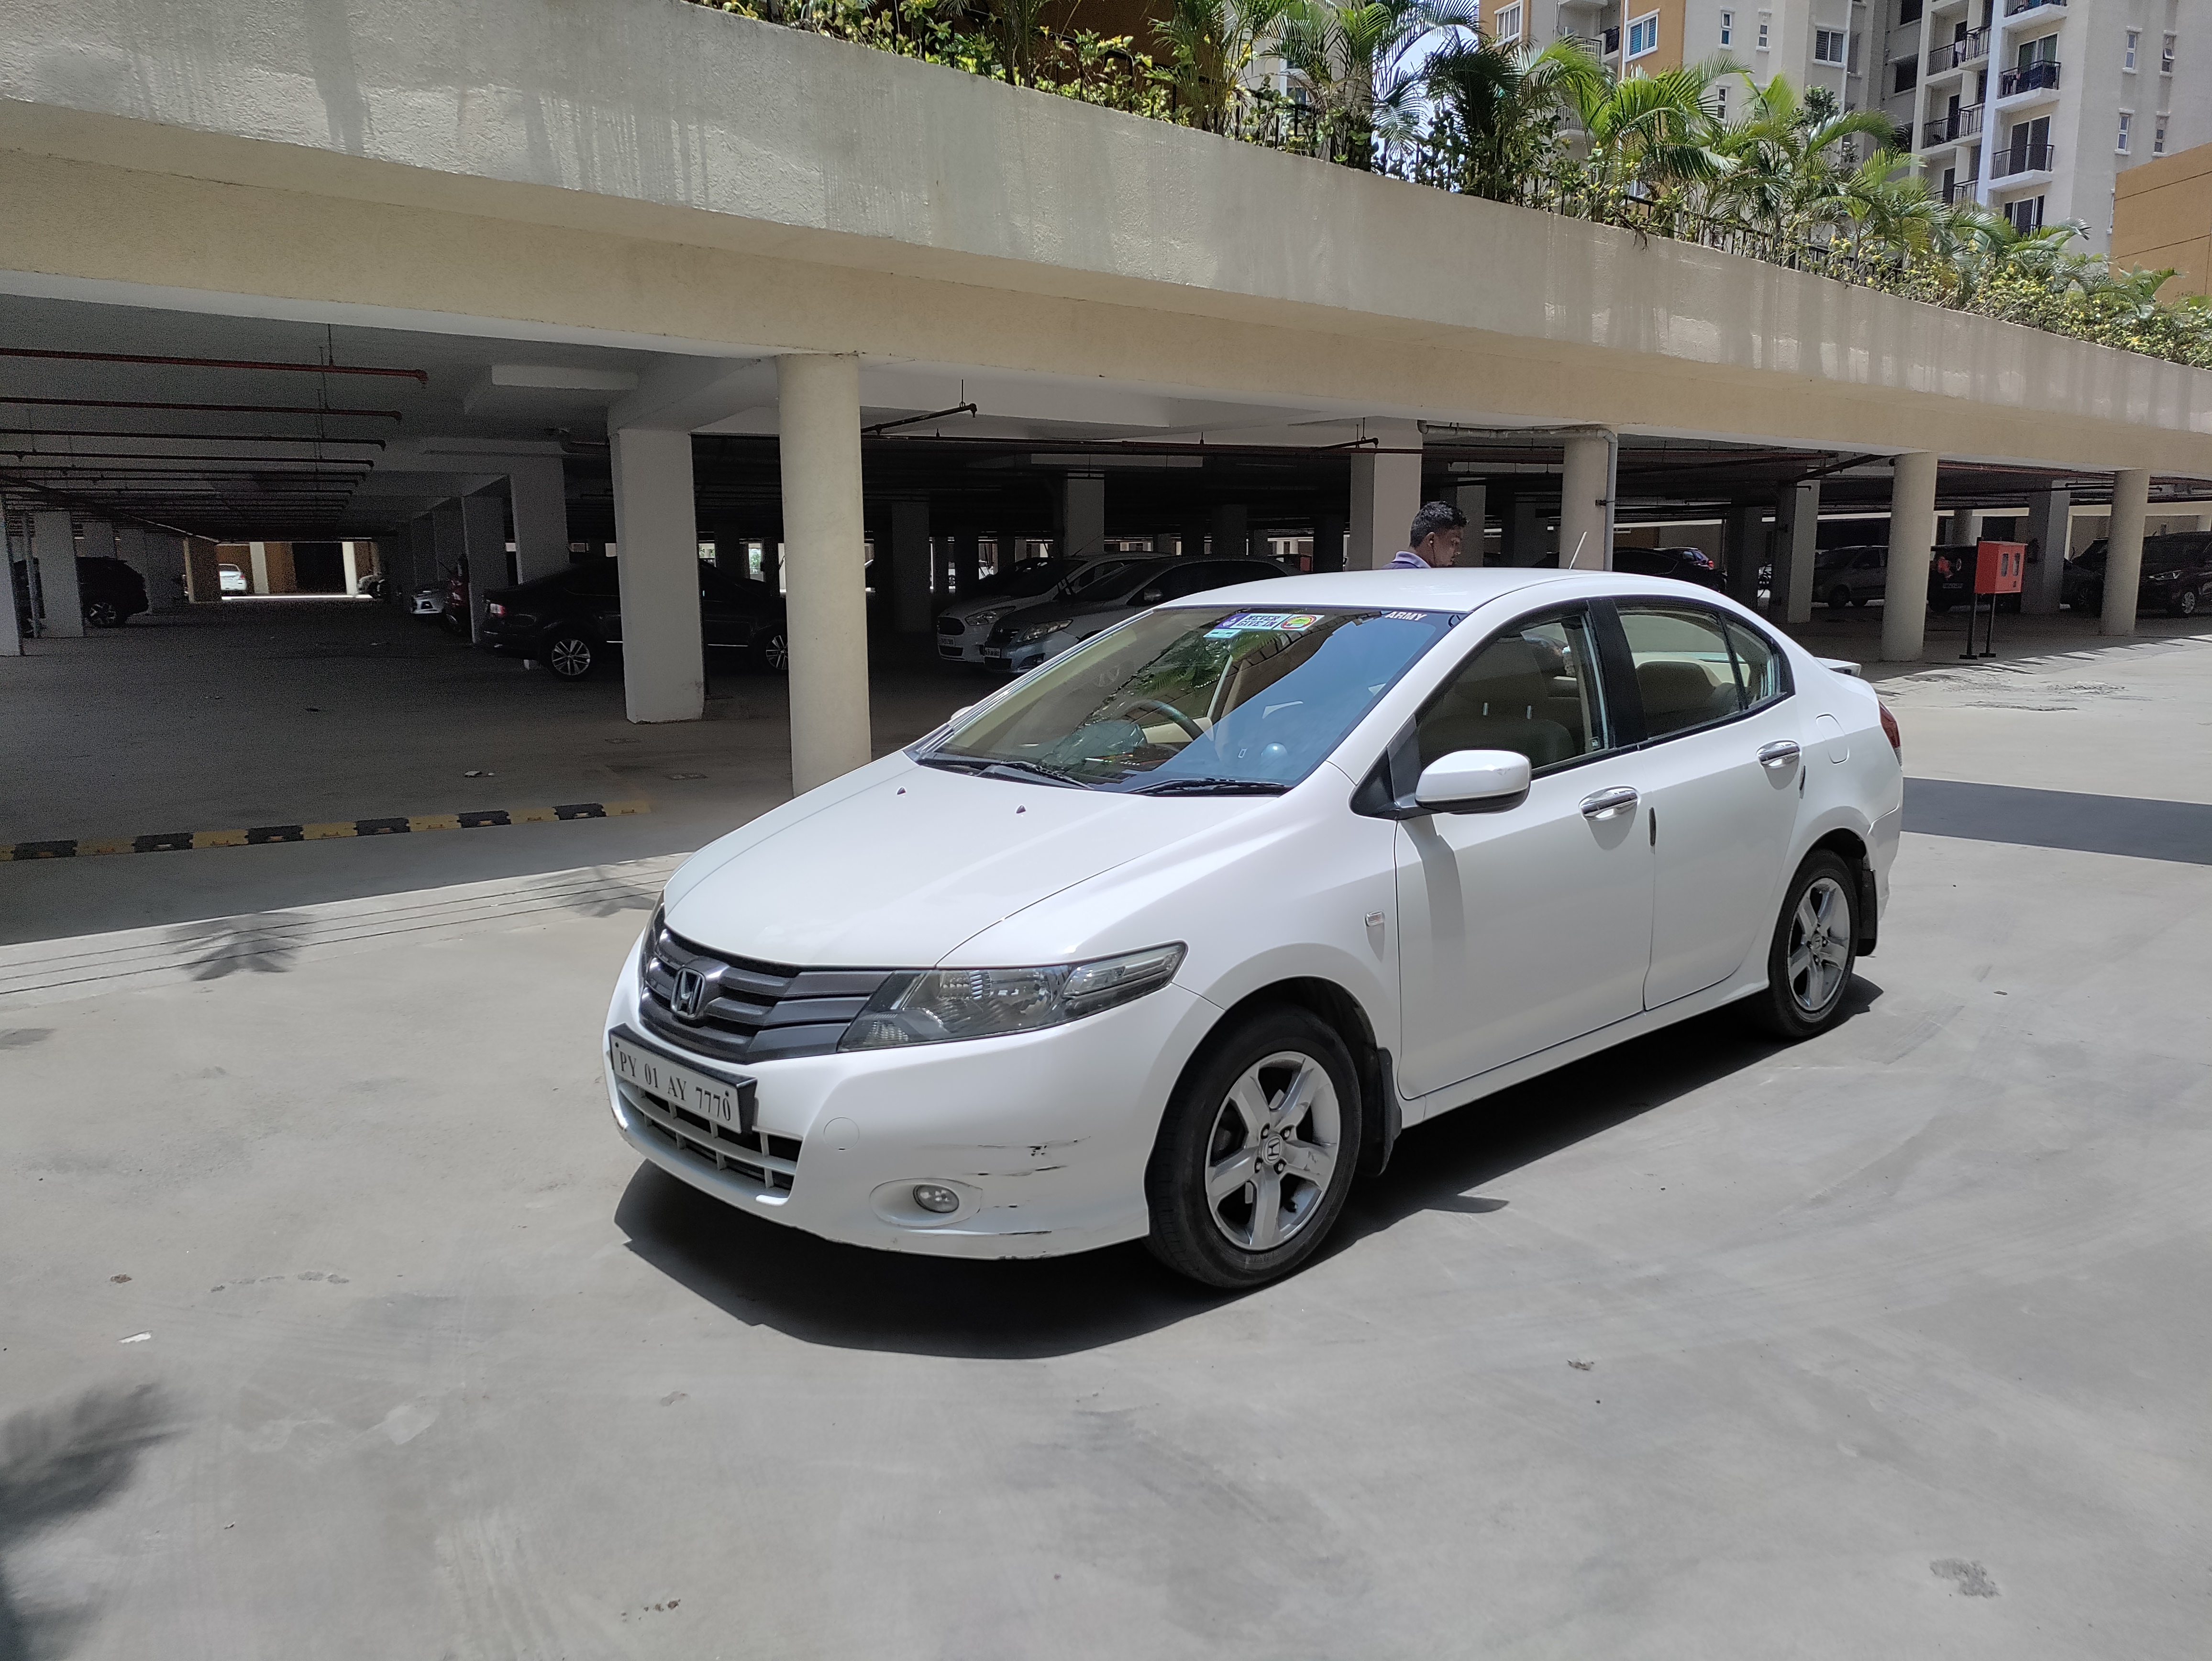 6807-for-sale-Honda-City-Petrol-First-Owner-2009-PY-registered-rs-410000